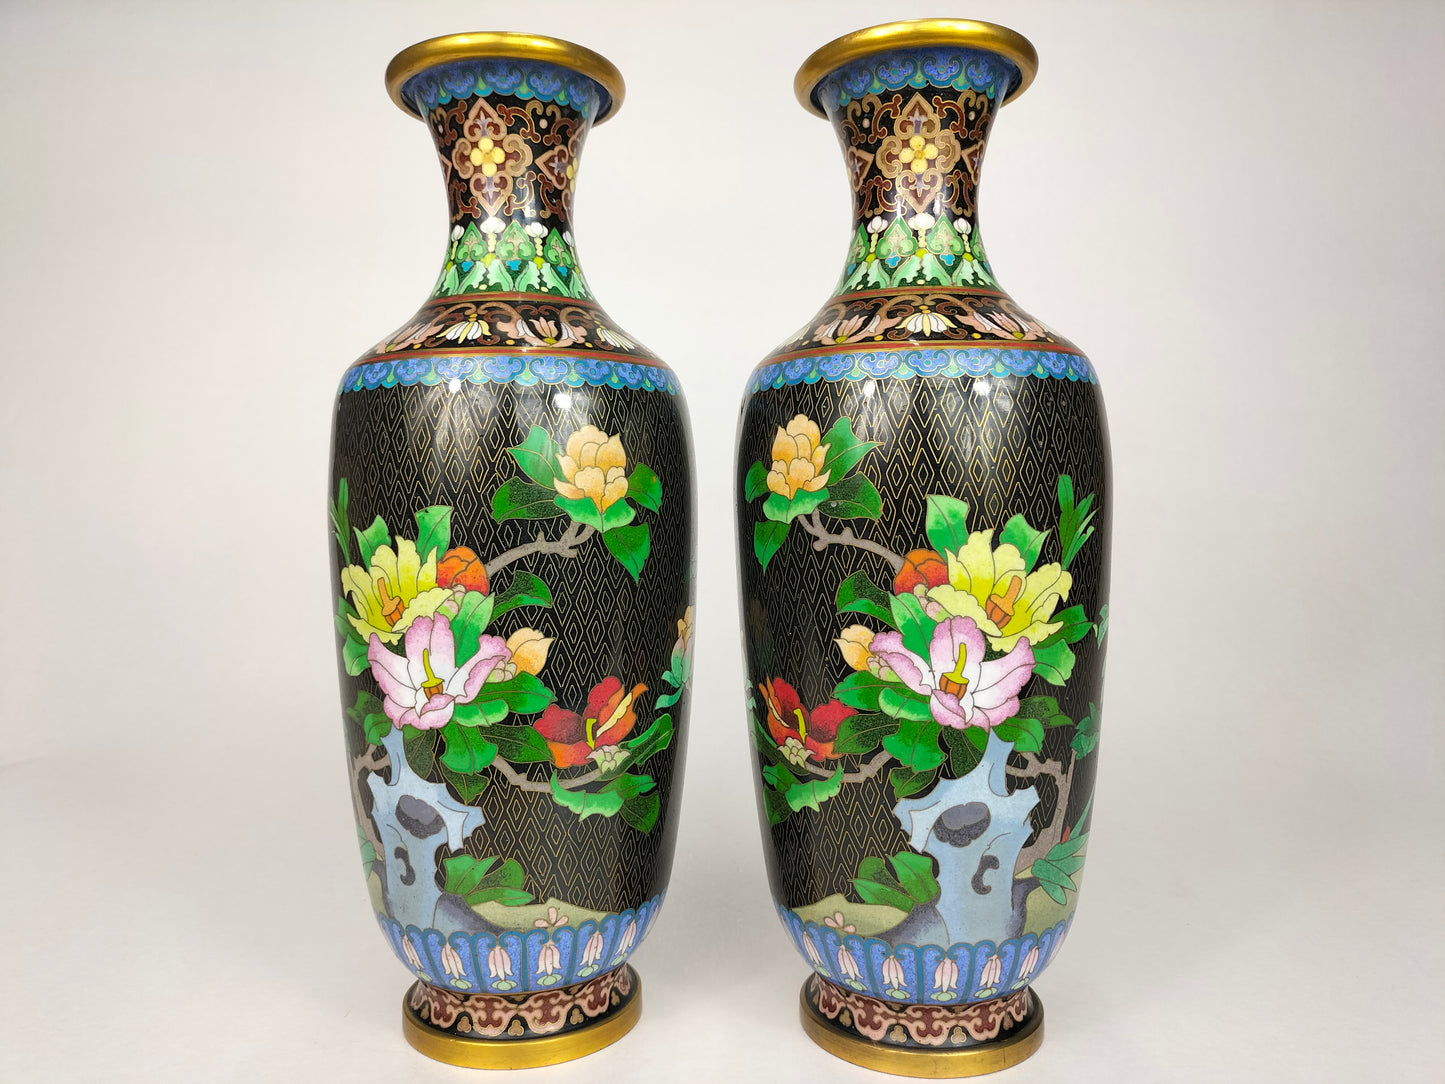 Pair of Chinese cloisonne vases decorated with birds and flowers // 20th century